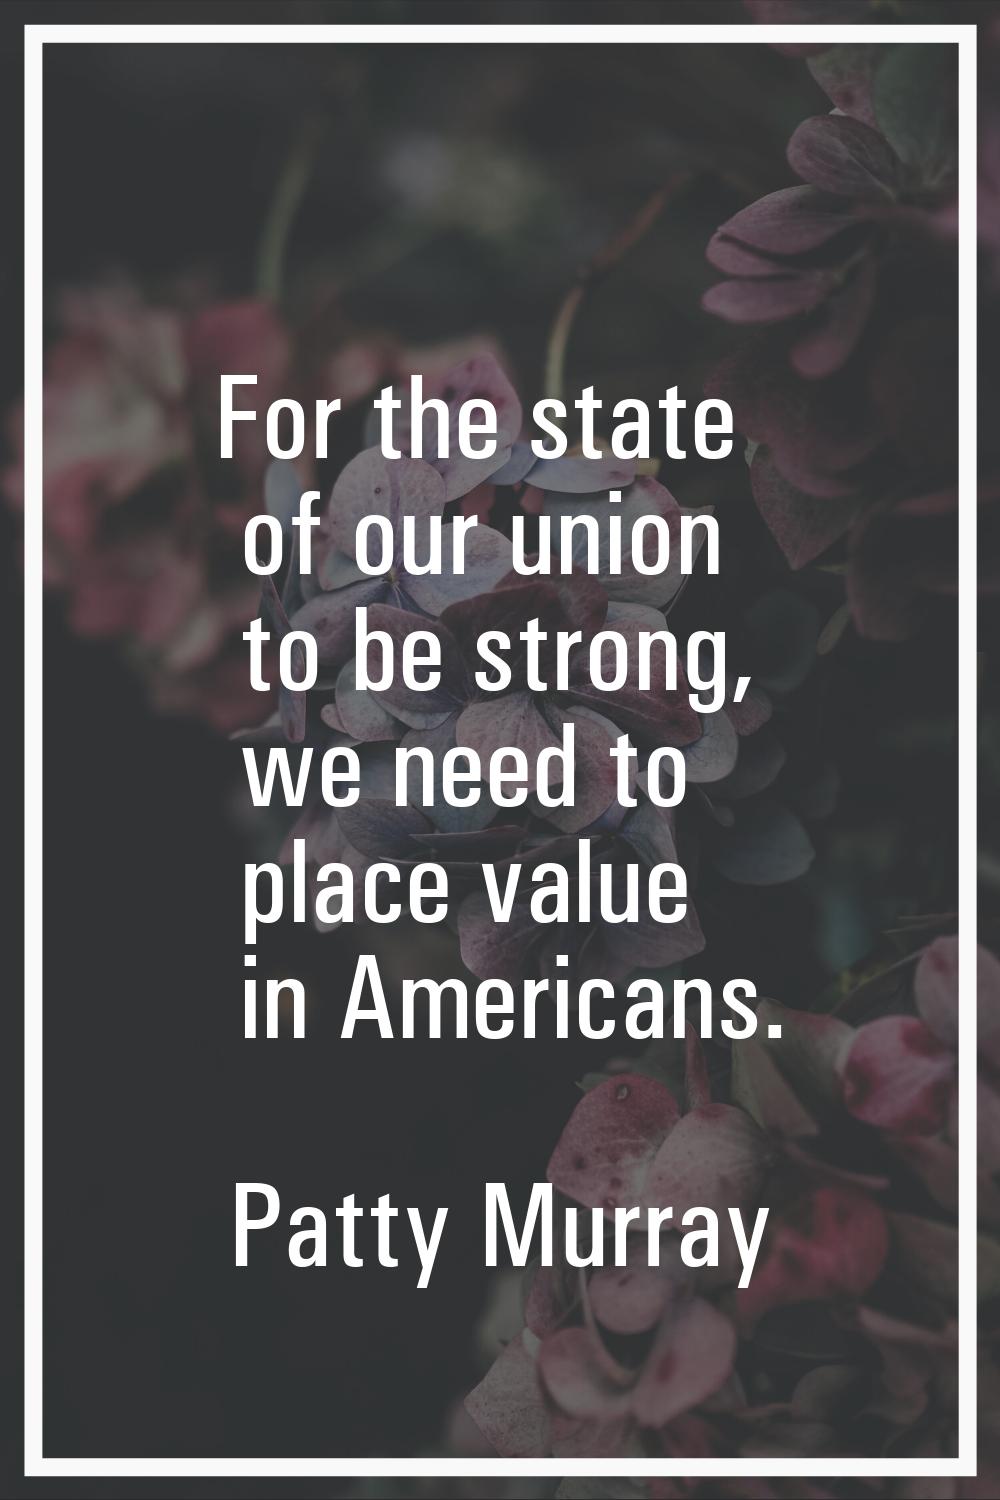 For the state of our union to be strong, we need to place value in Americans.